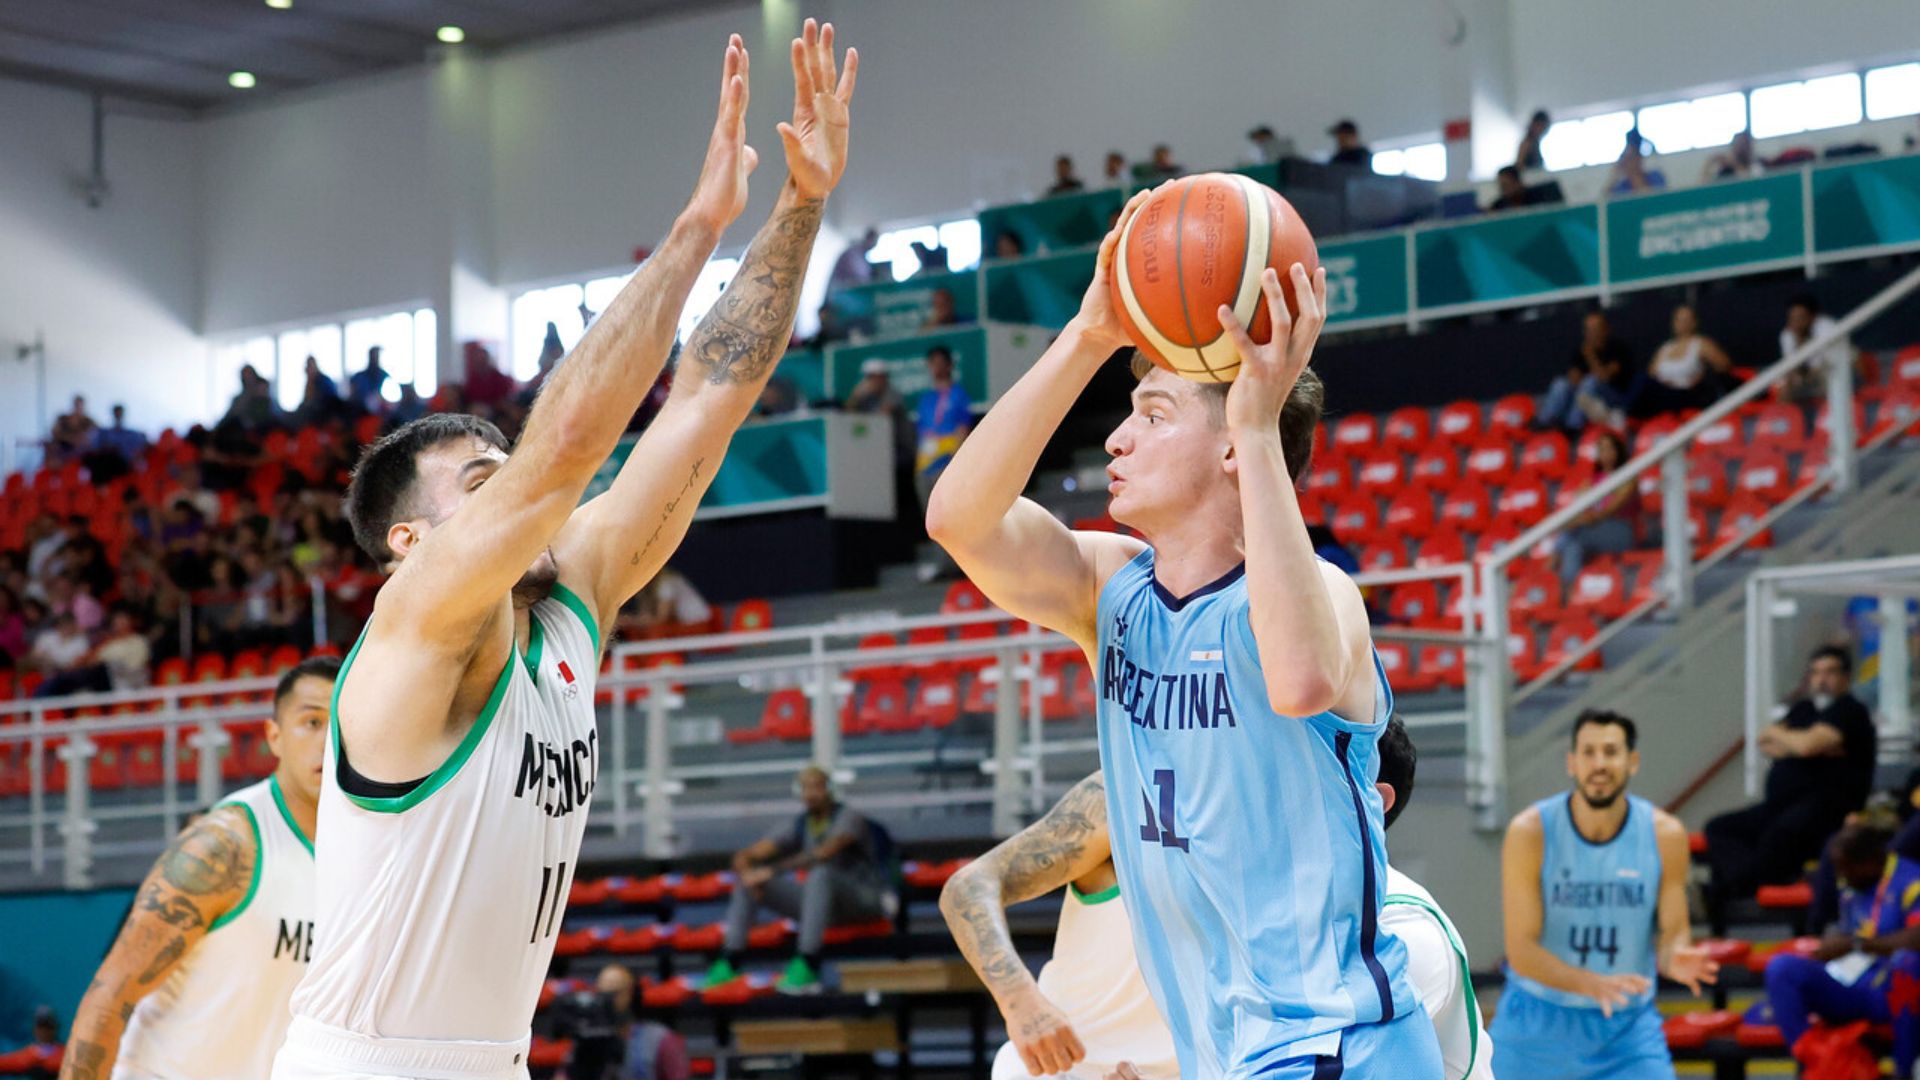 Argentina Defeats Mexico and Will Contend for Gold in Male's Basketball